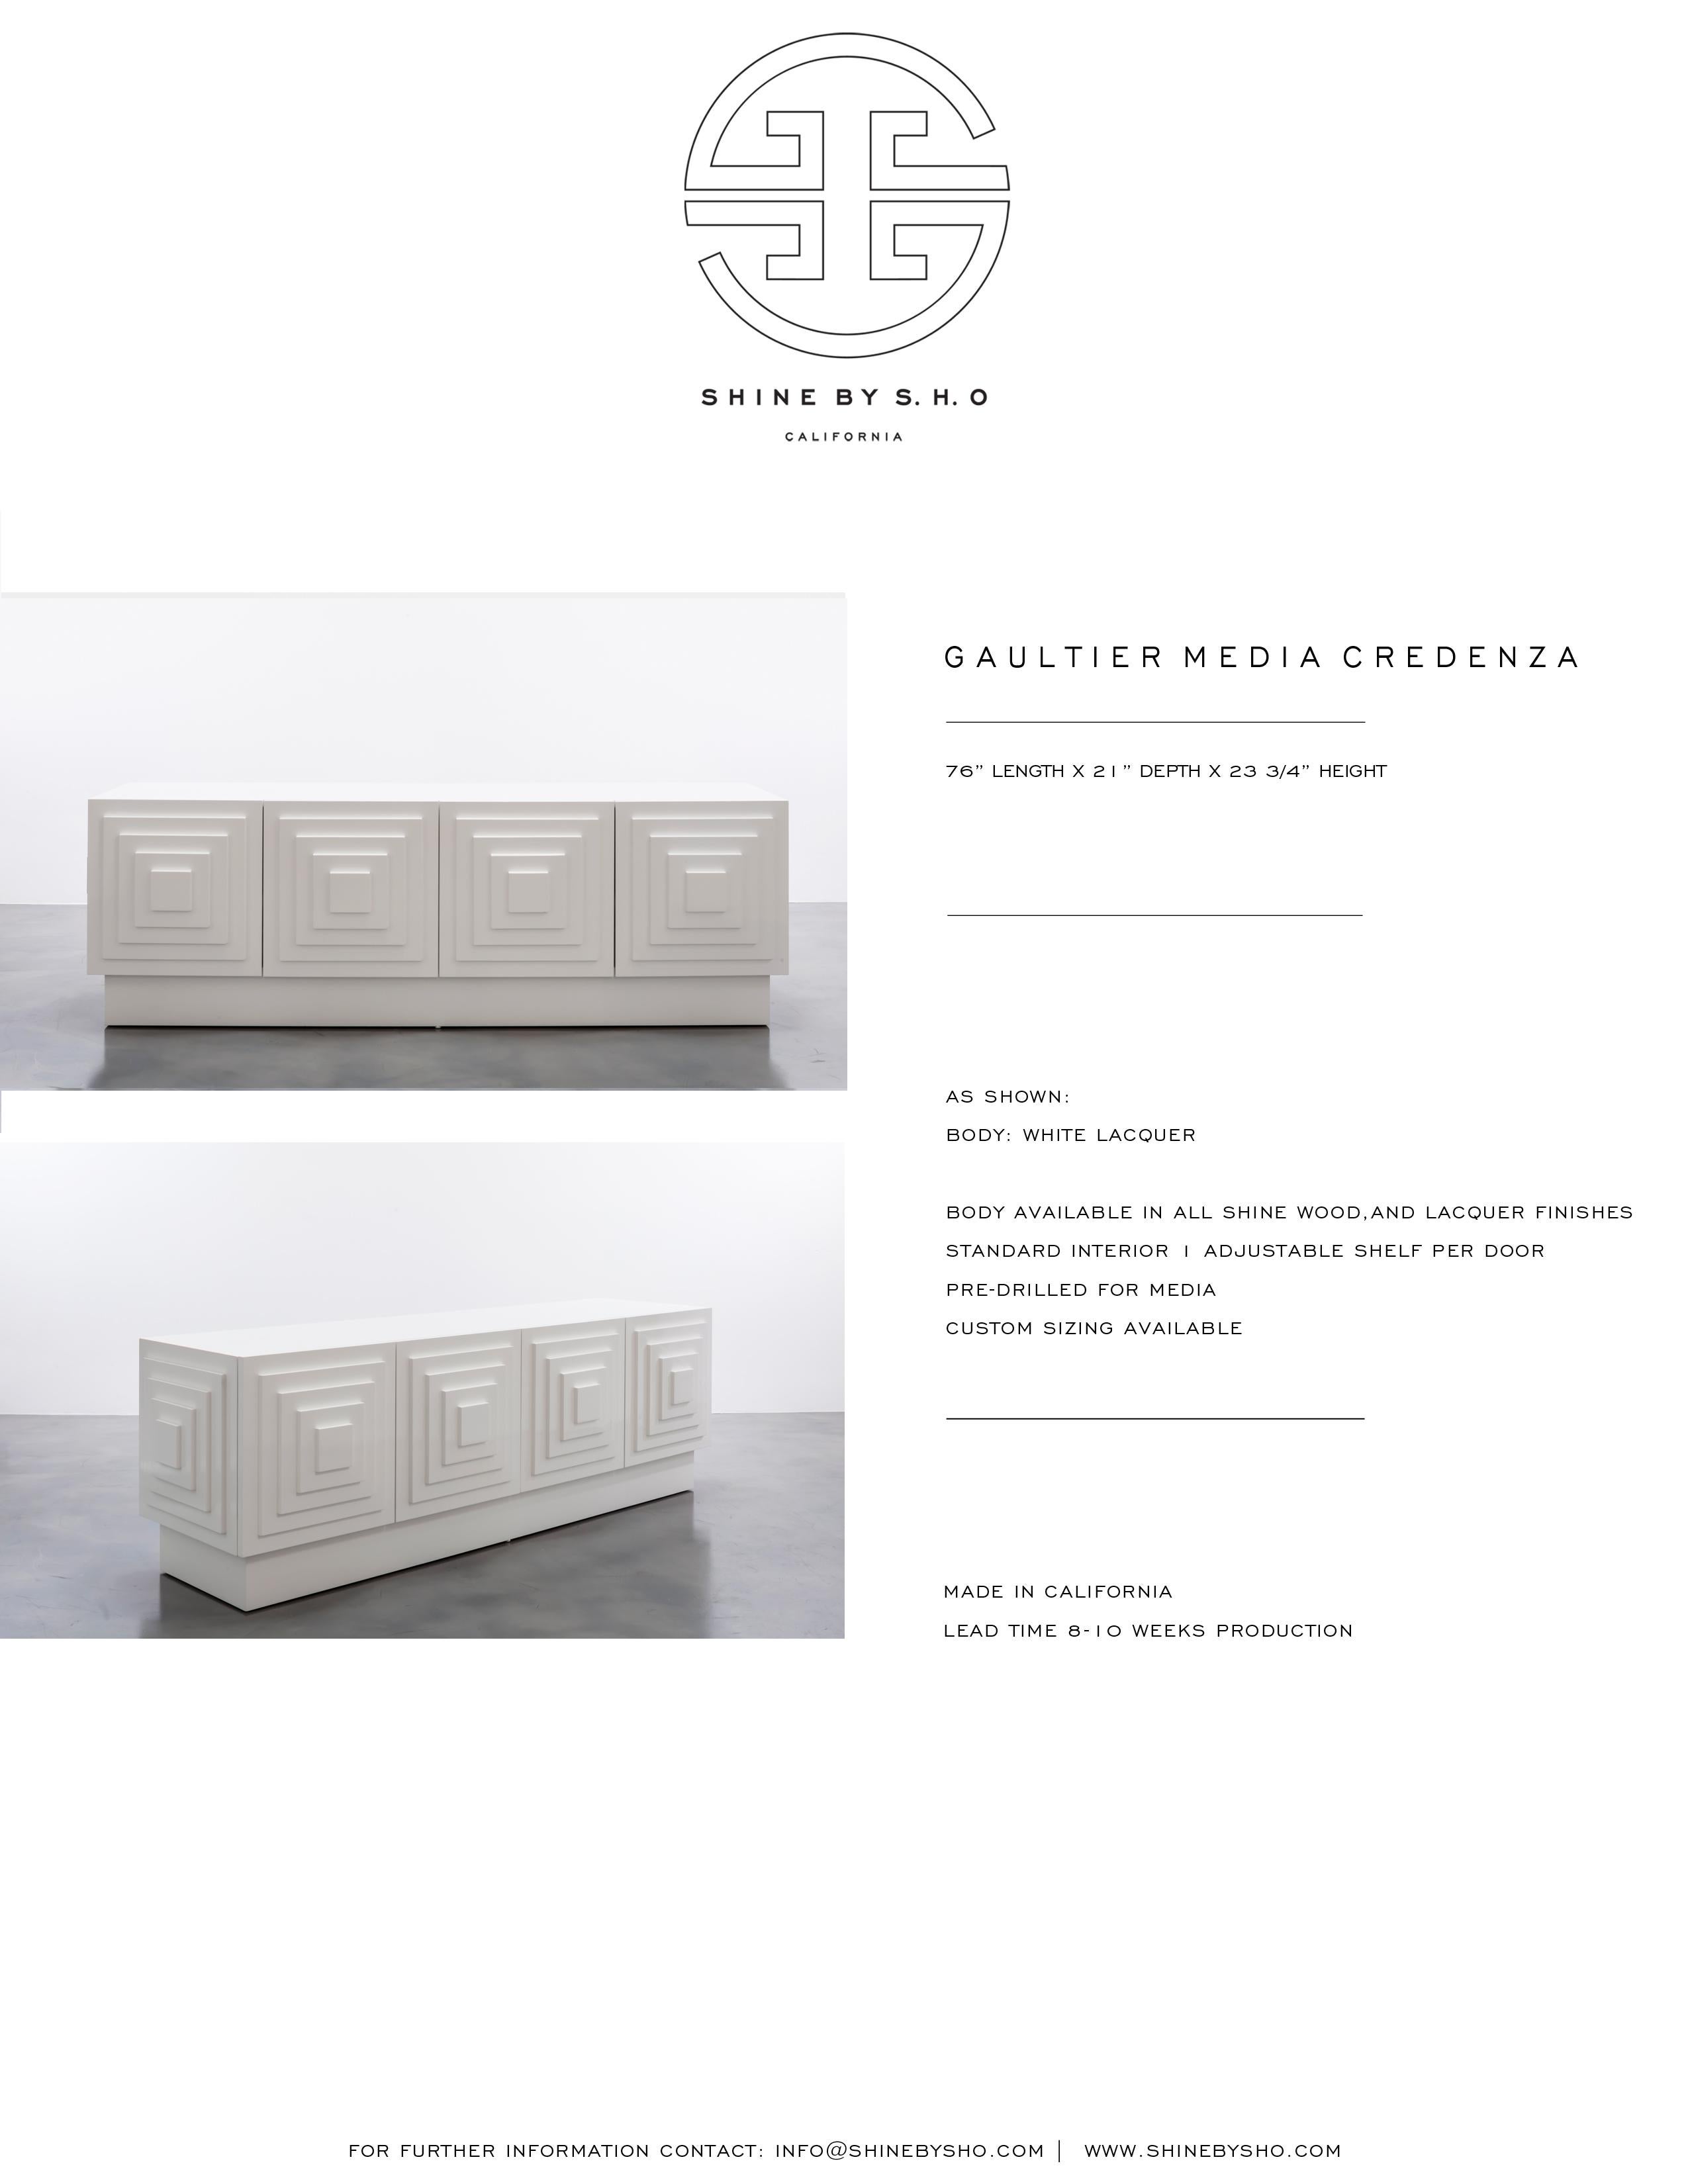 GAULTIER MEDIA CREDENZA - Modern Geometric Cabinet in White Lacquer In New Condition For Sale In Laguna Niguel, CA